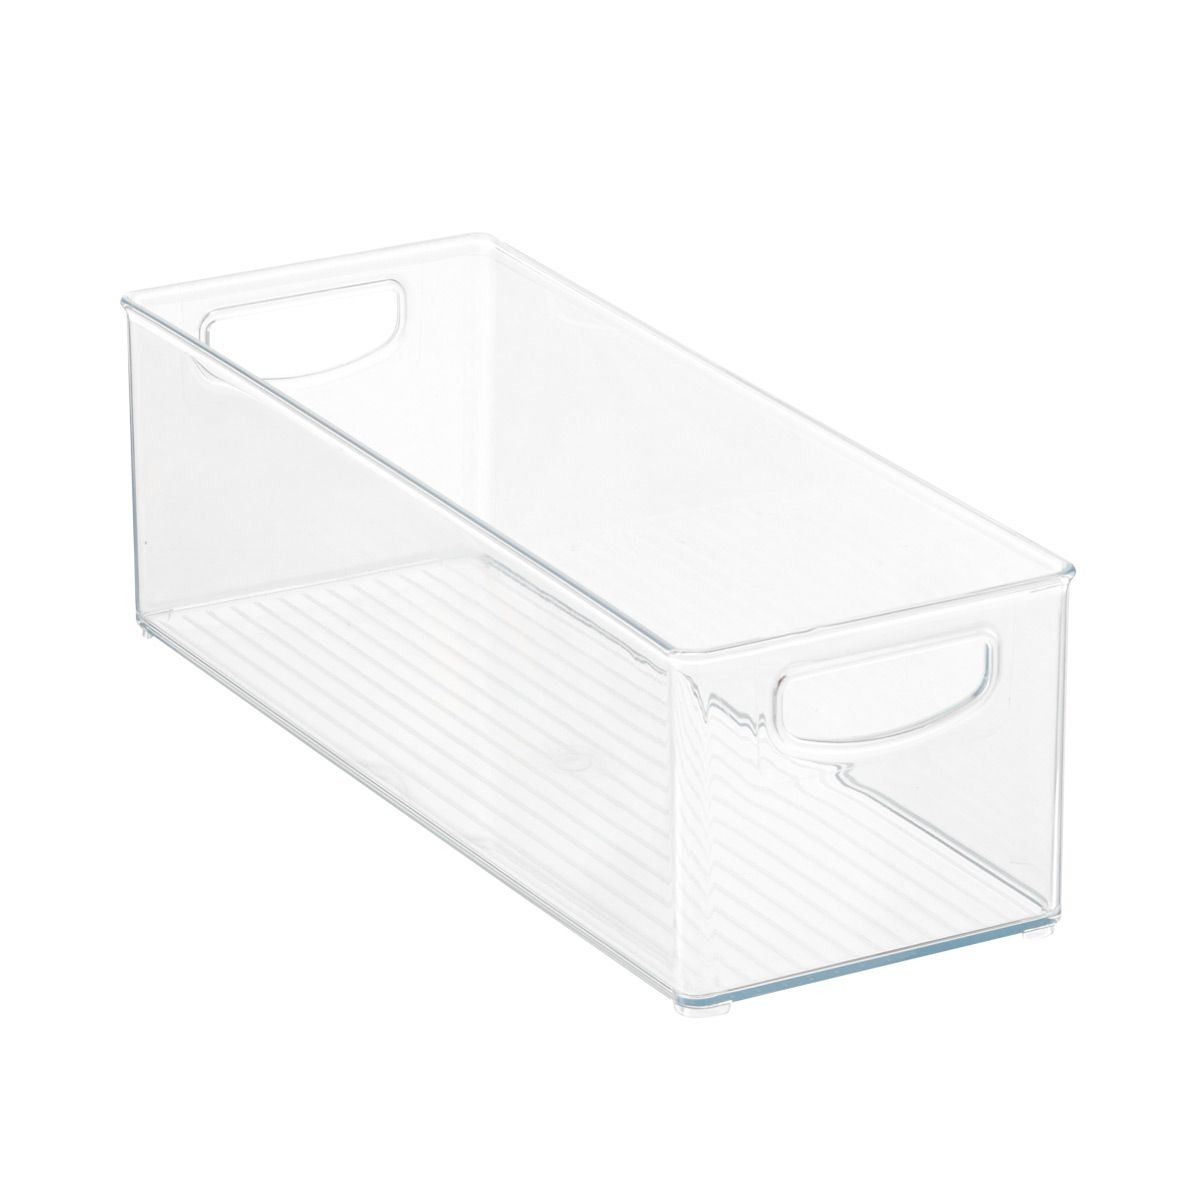 iDESIGN Linus Medium Deep Drawer Bin ClearSKU:100599154.769 Reviews | The Container Store